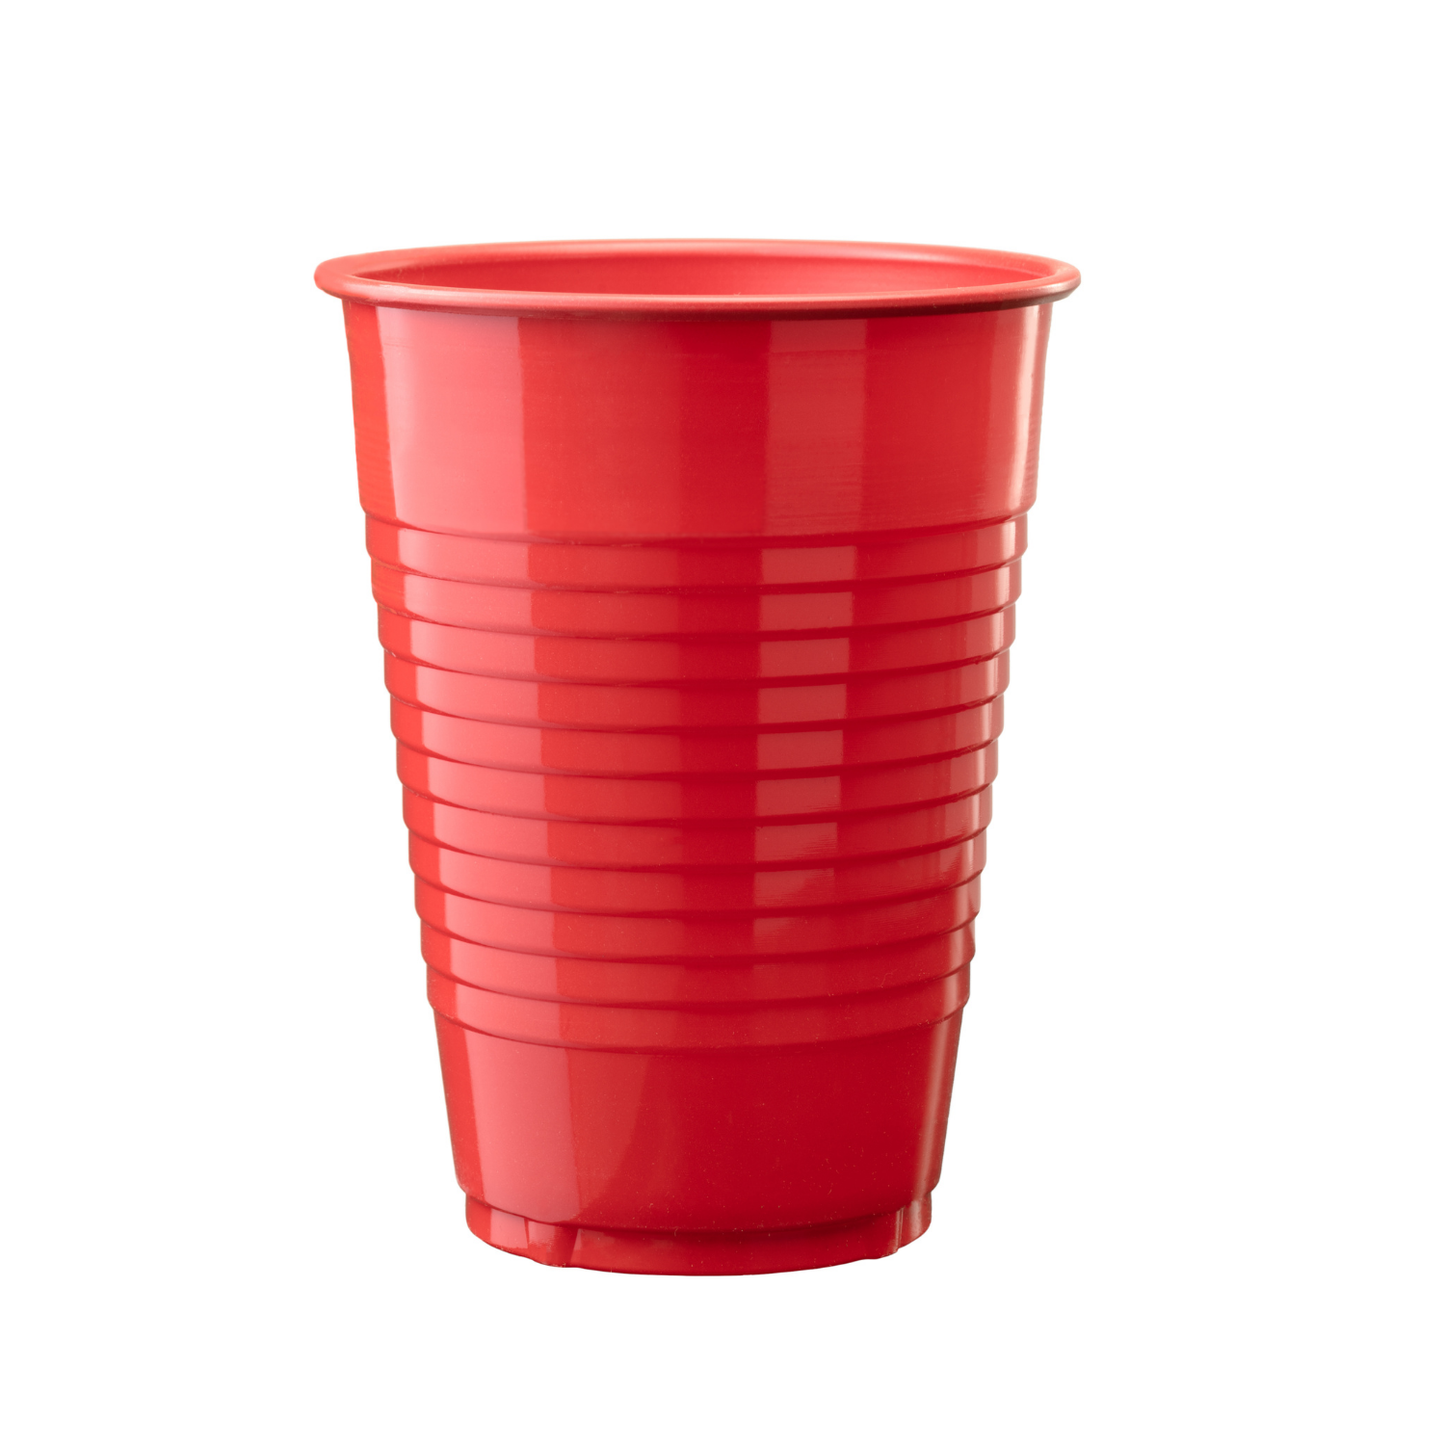 12 Oz. Red Plastic Cups - 50 Ct.: 12 oz. / Red